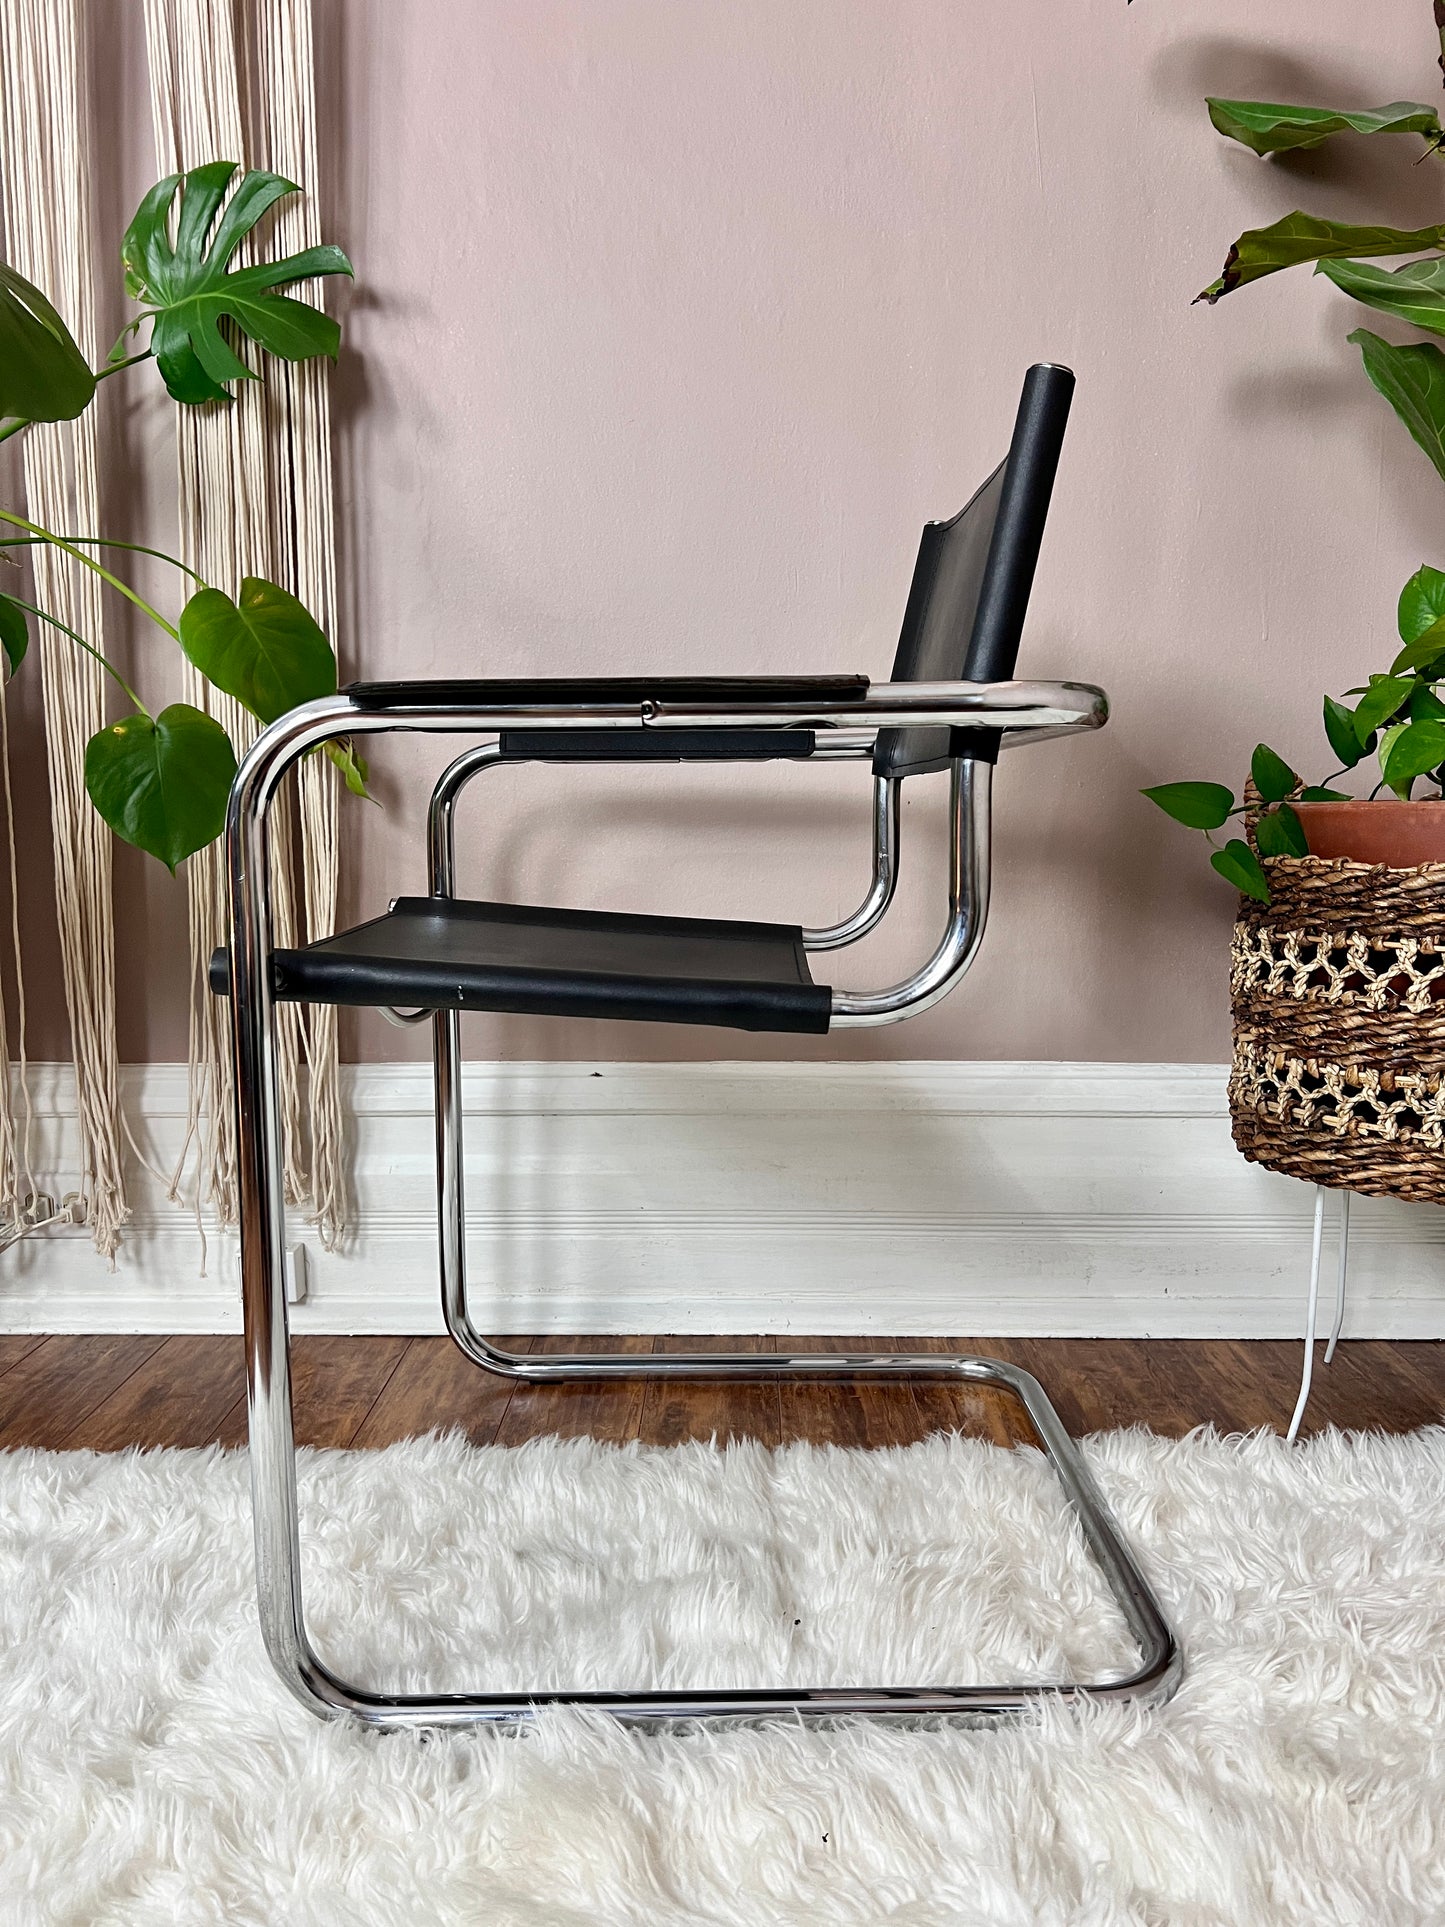 The Mart Stam S34 Chair